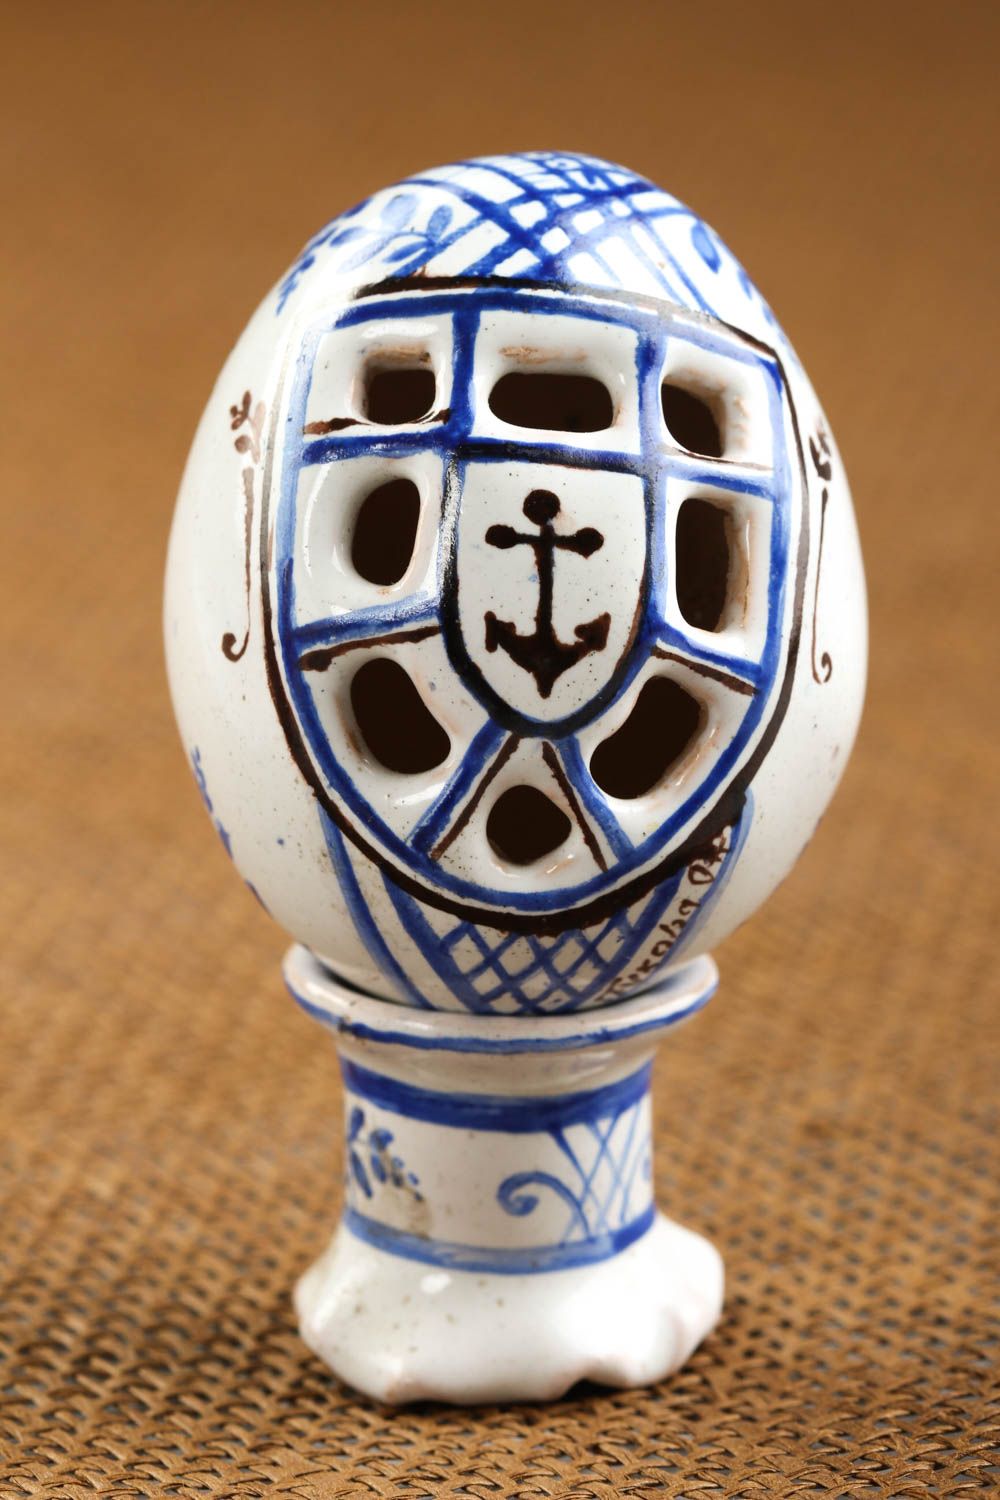 Handmade ceramic egg collectible figurines cool rooms decorative use only photo 1